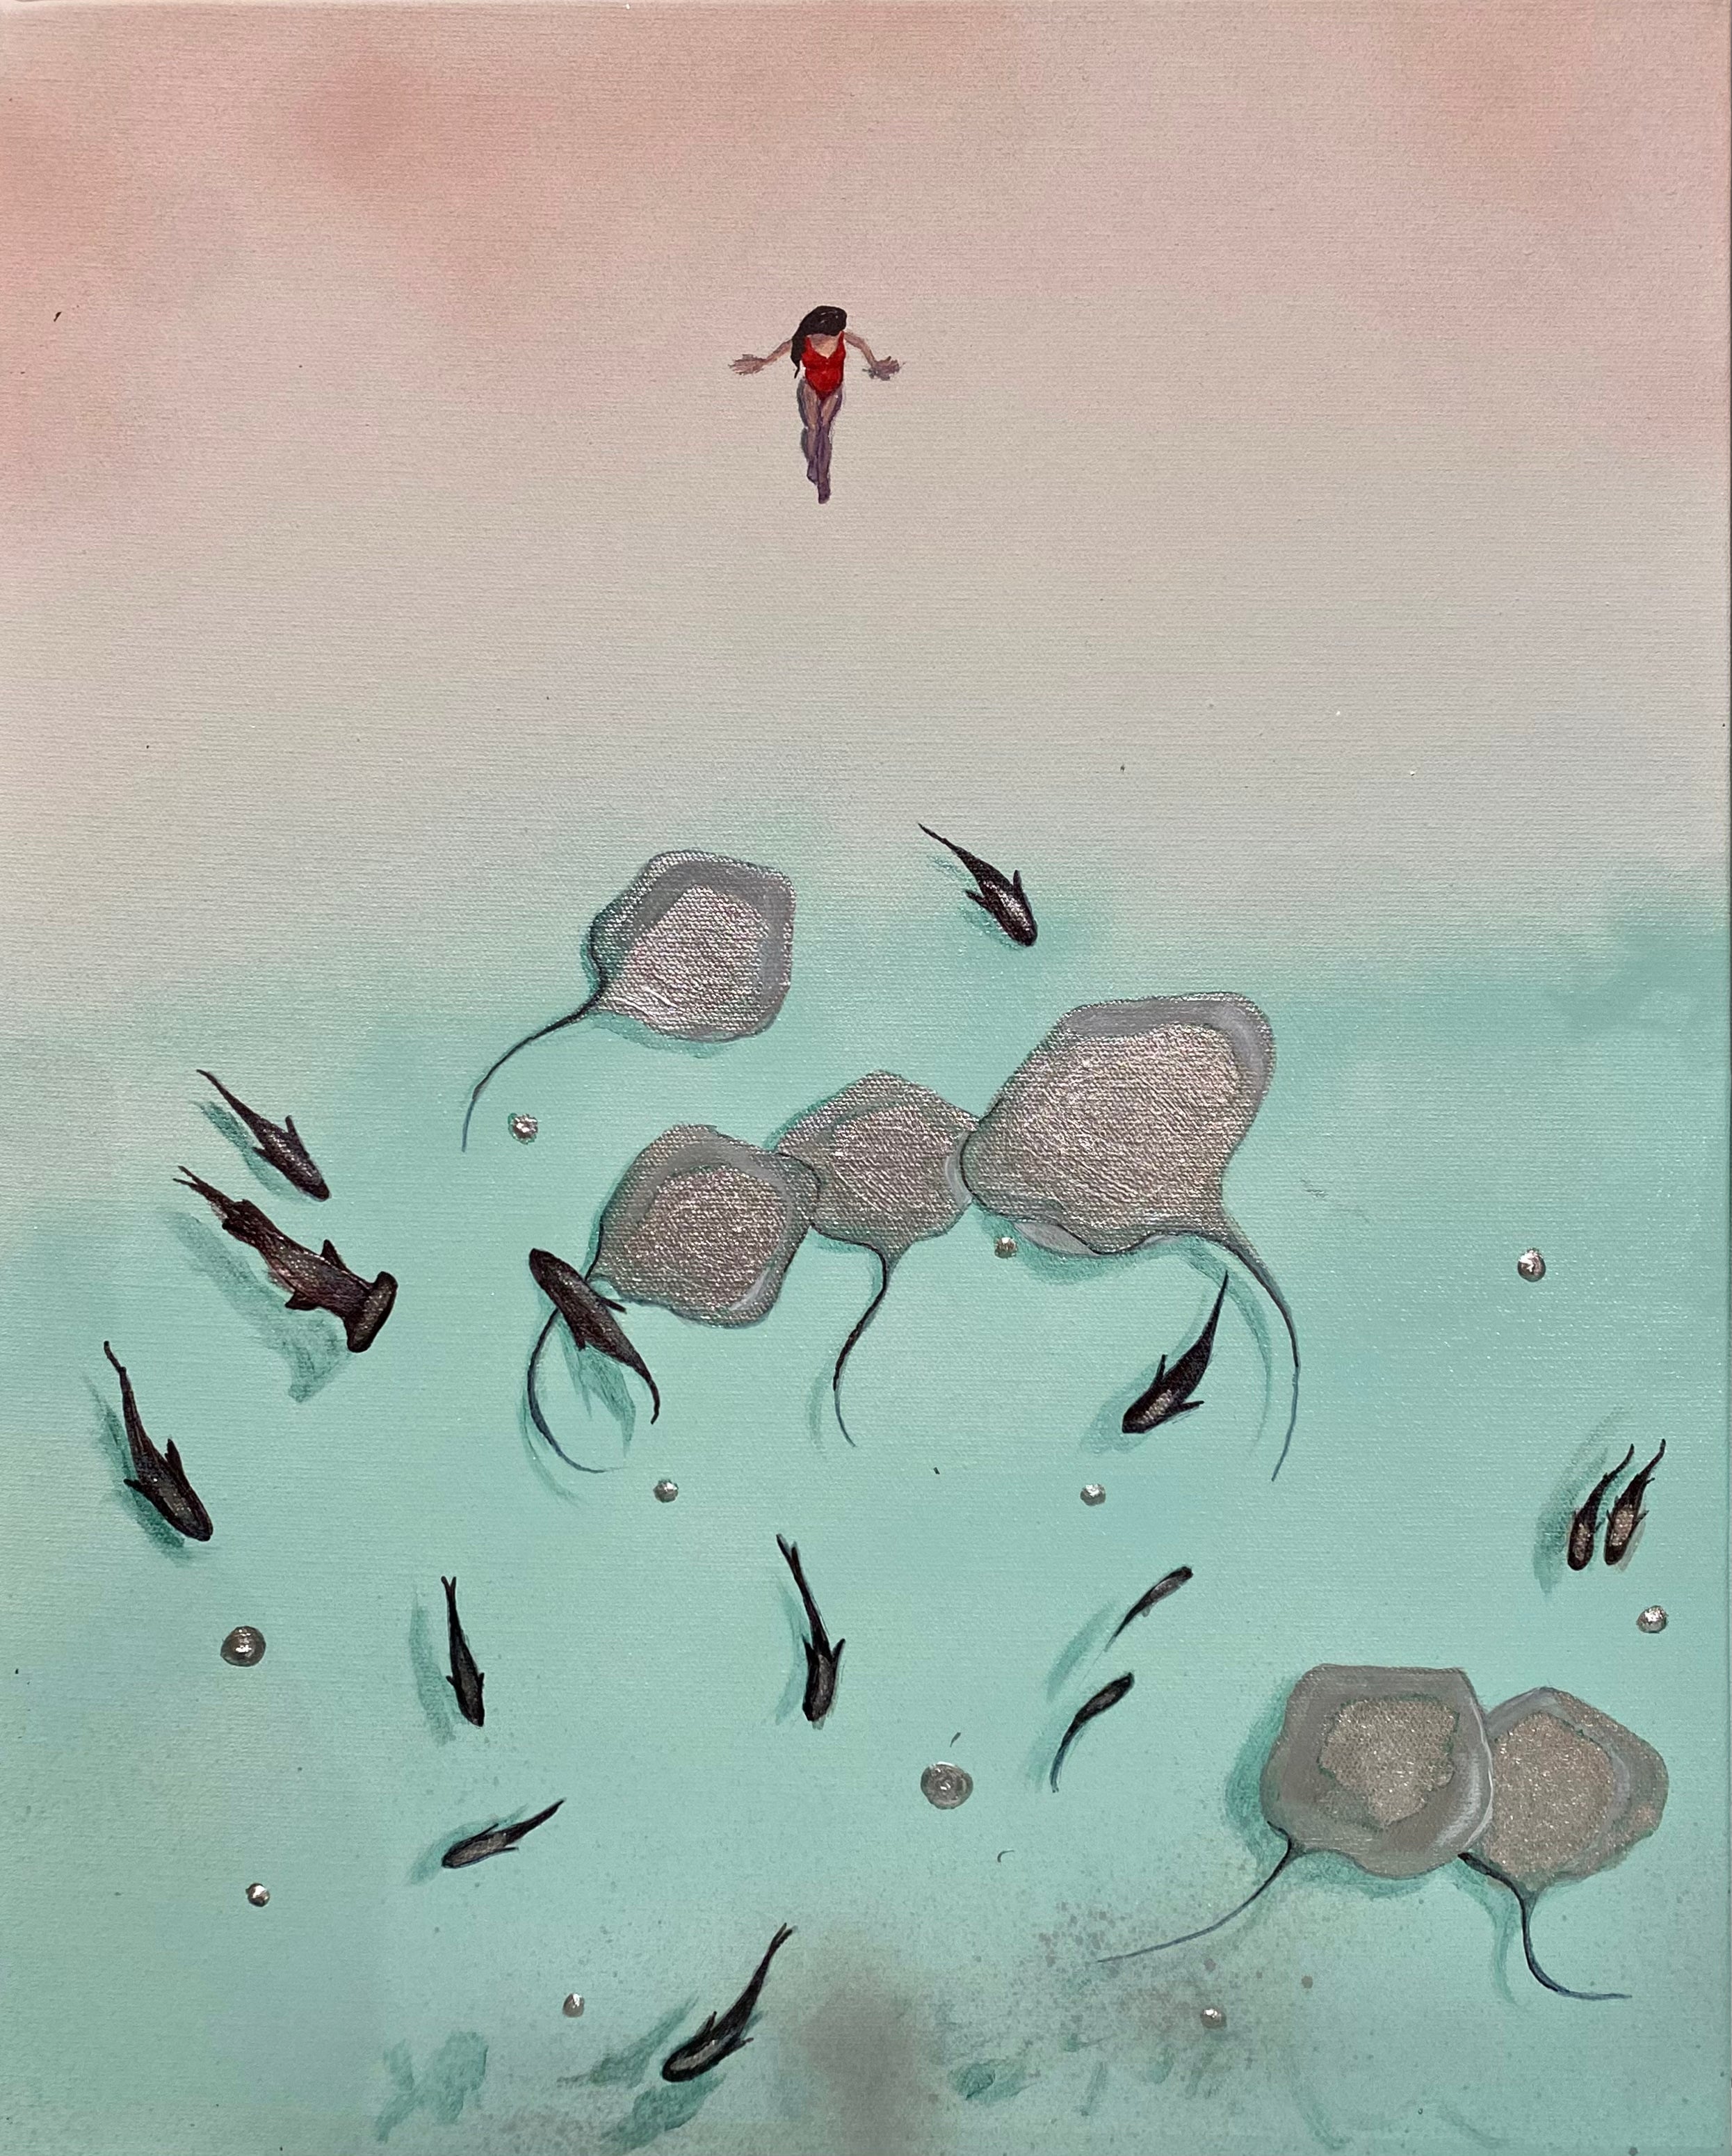 Someone is waiting for me 2 - Maldives - Sting rays - Ocean Mini Artwork Mothers Day Gift